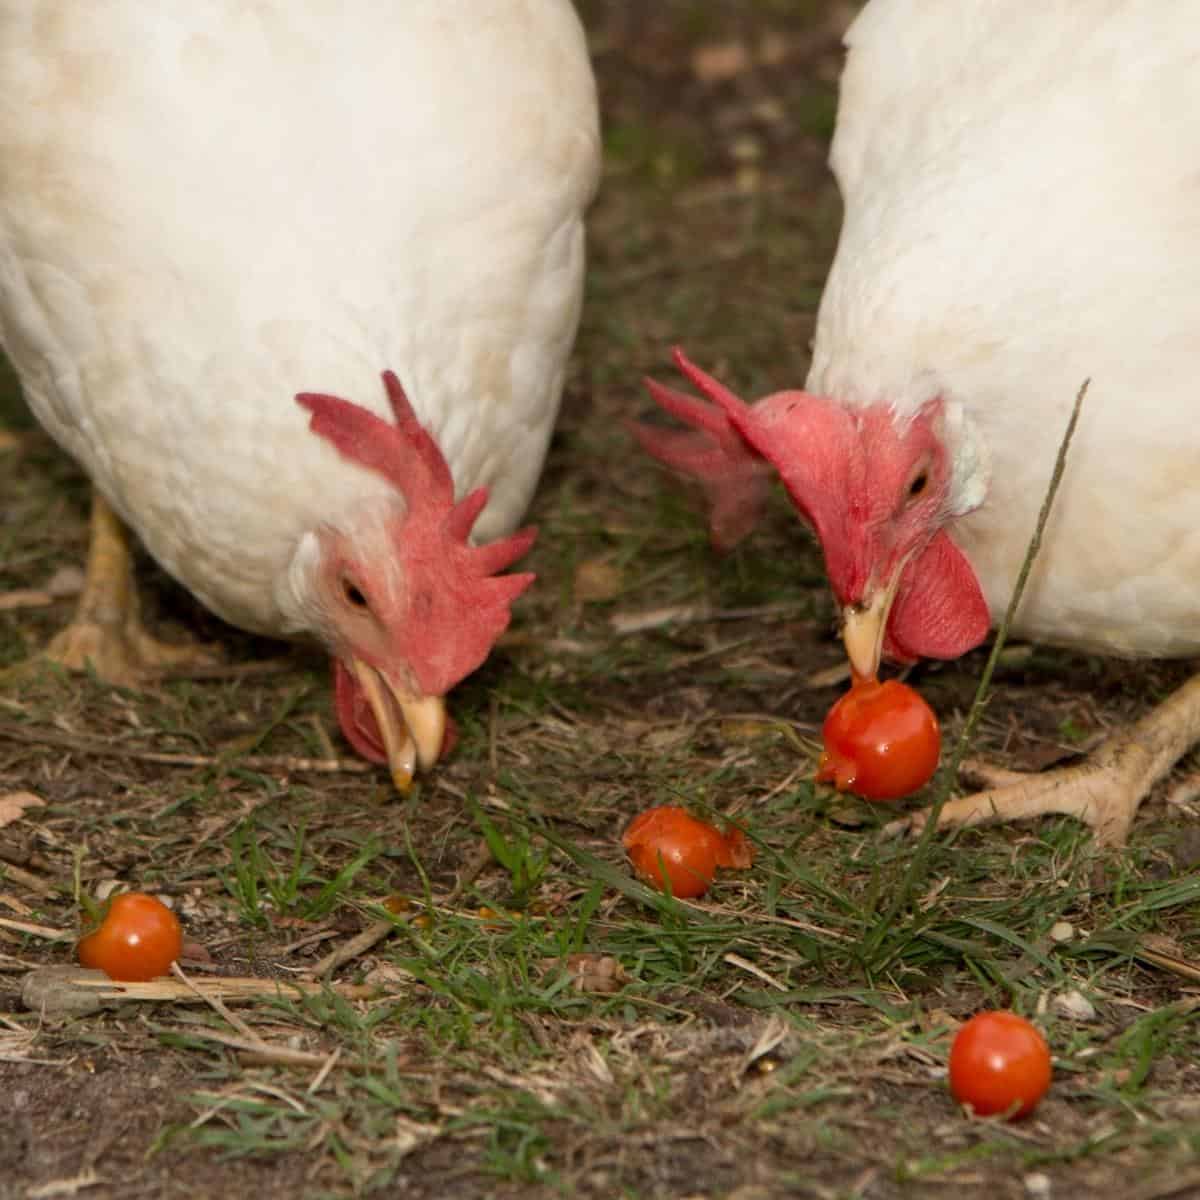 Potential Risks Of Feeding Tomatoes To Baby Chicks